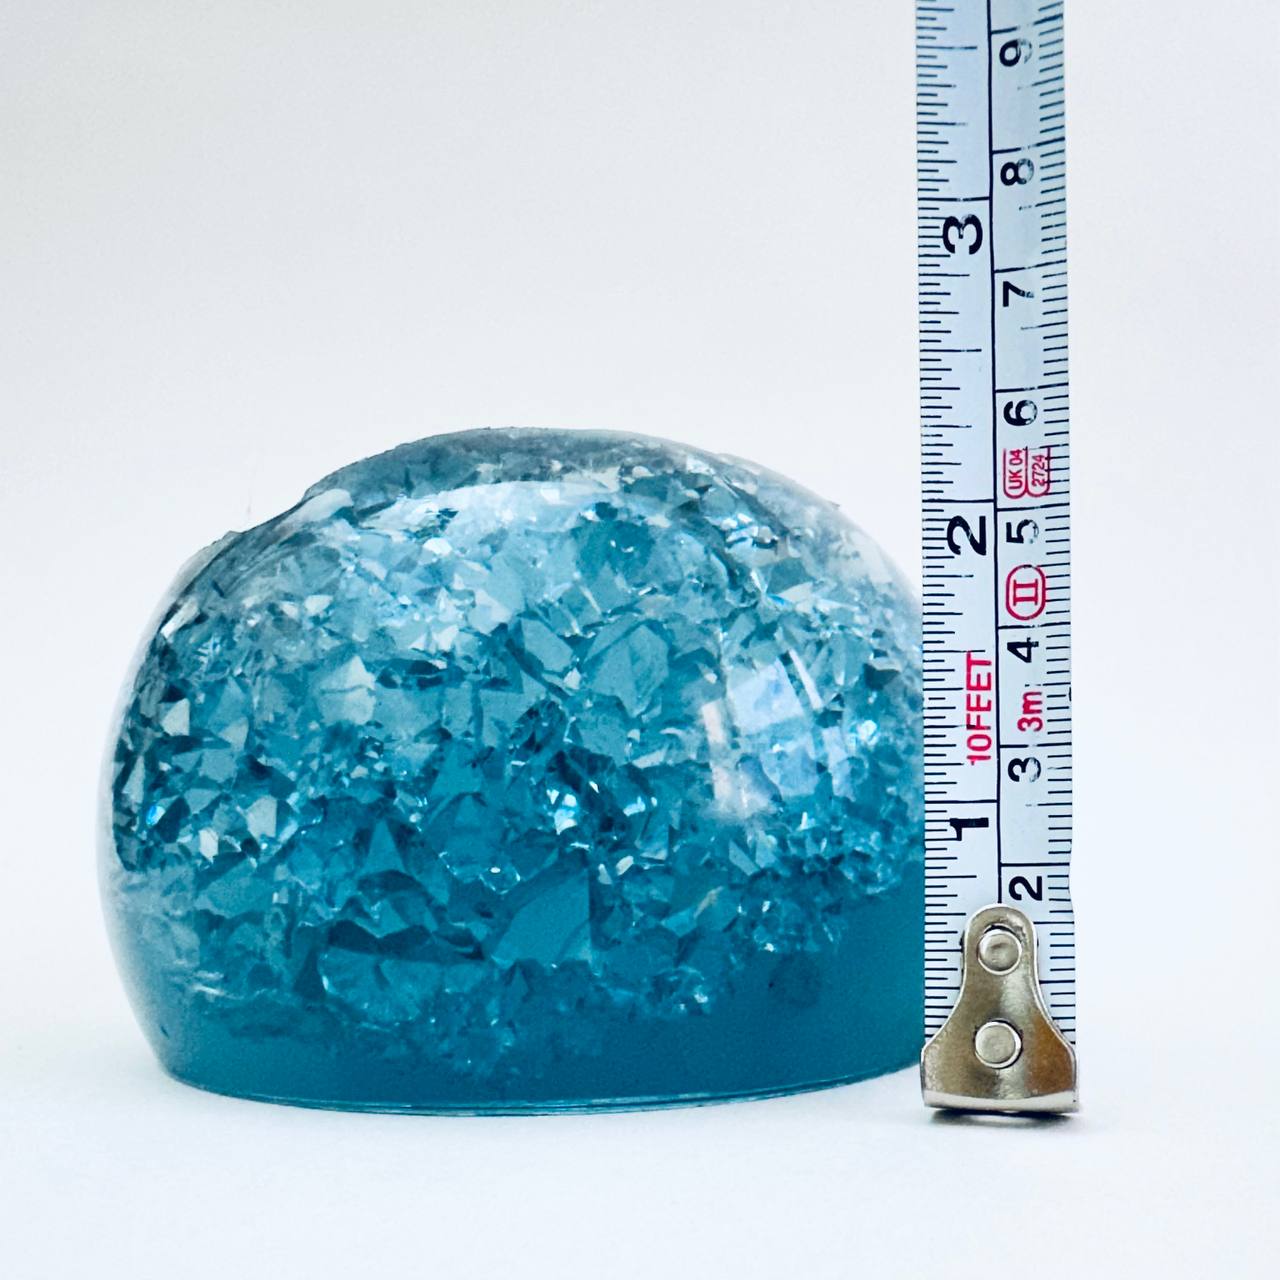 Handmade Crystal Geode Spheres Silicone Mold: Perfect for Business Card Holders or Jewelry Storage